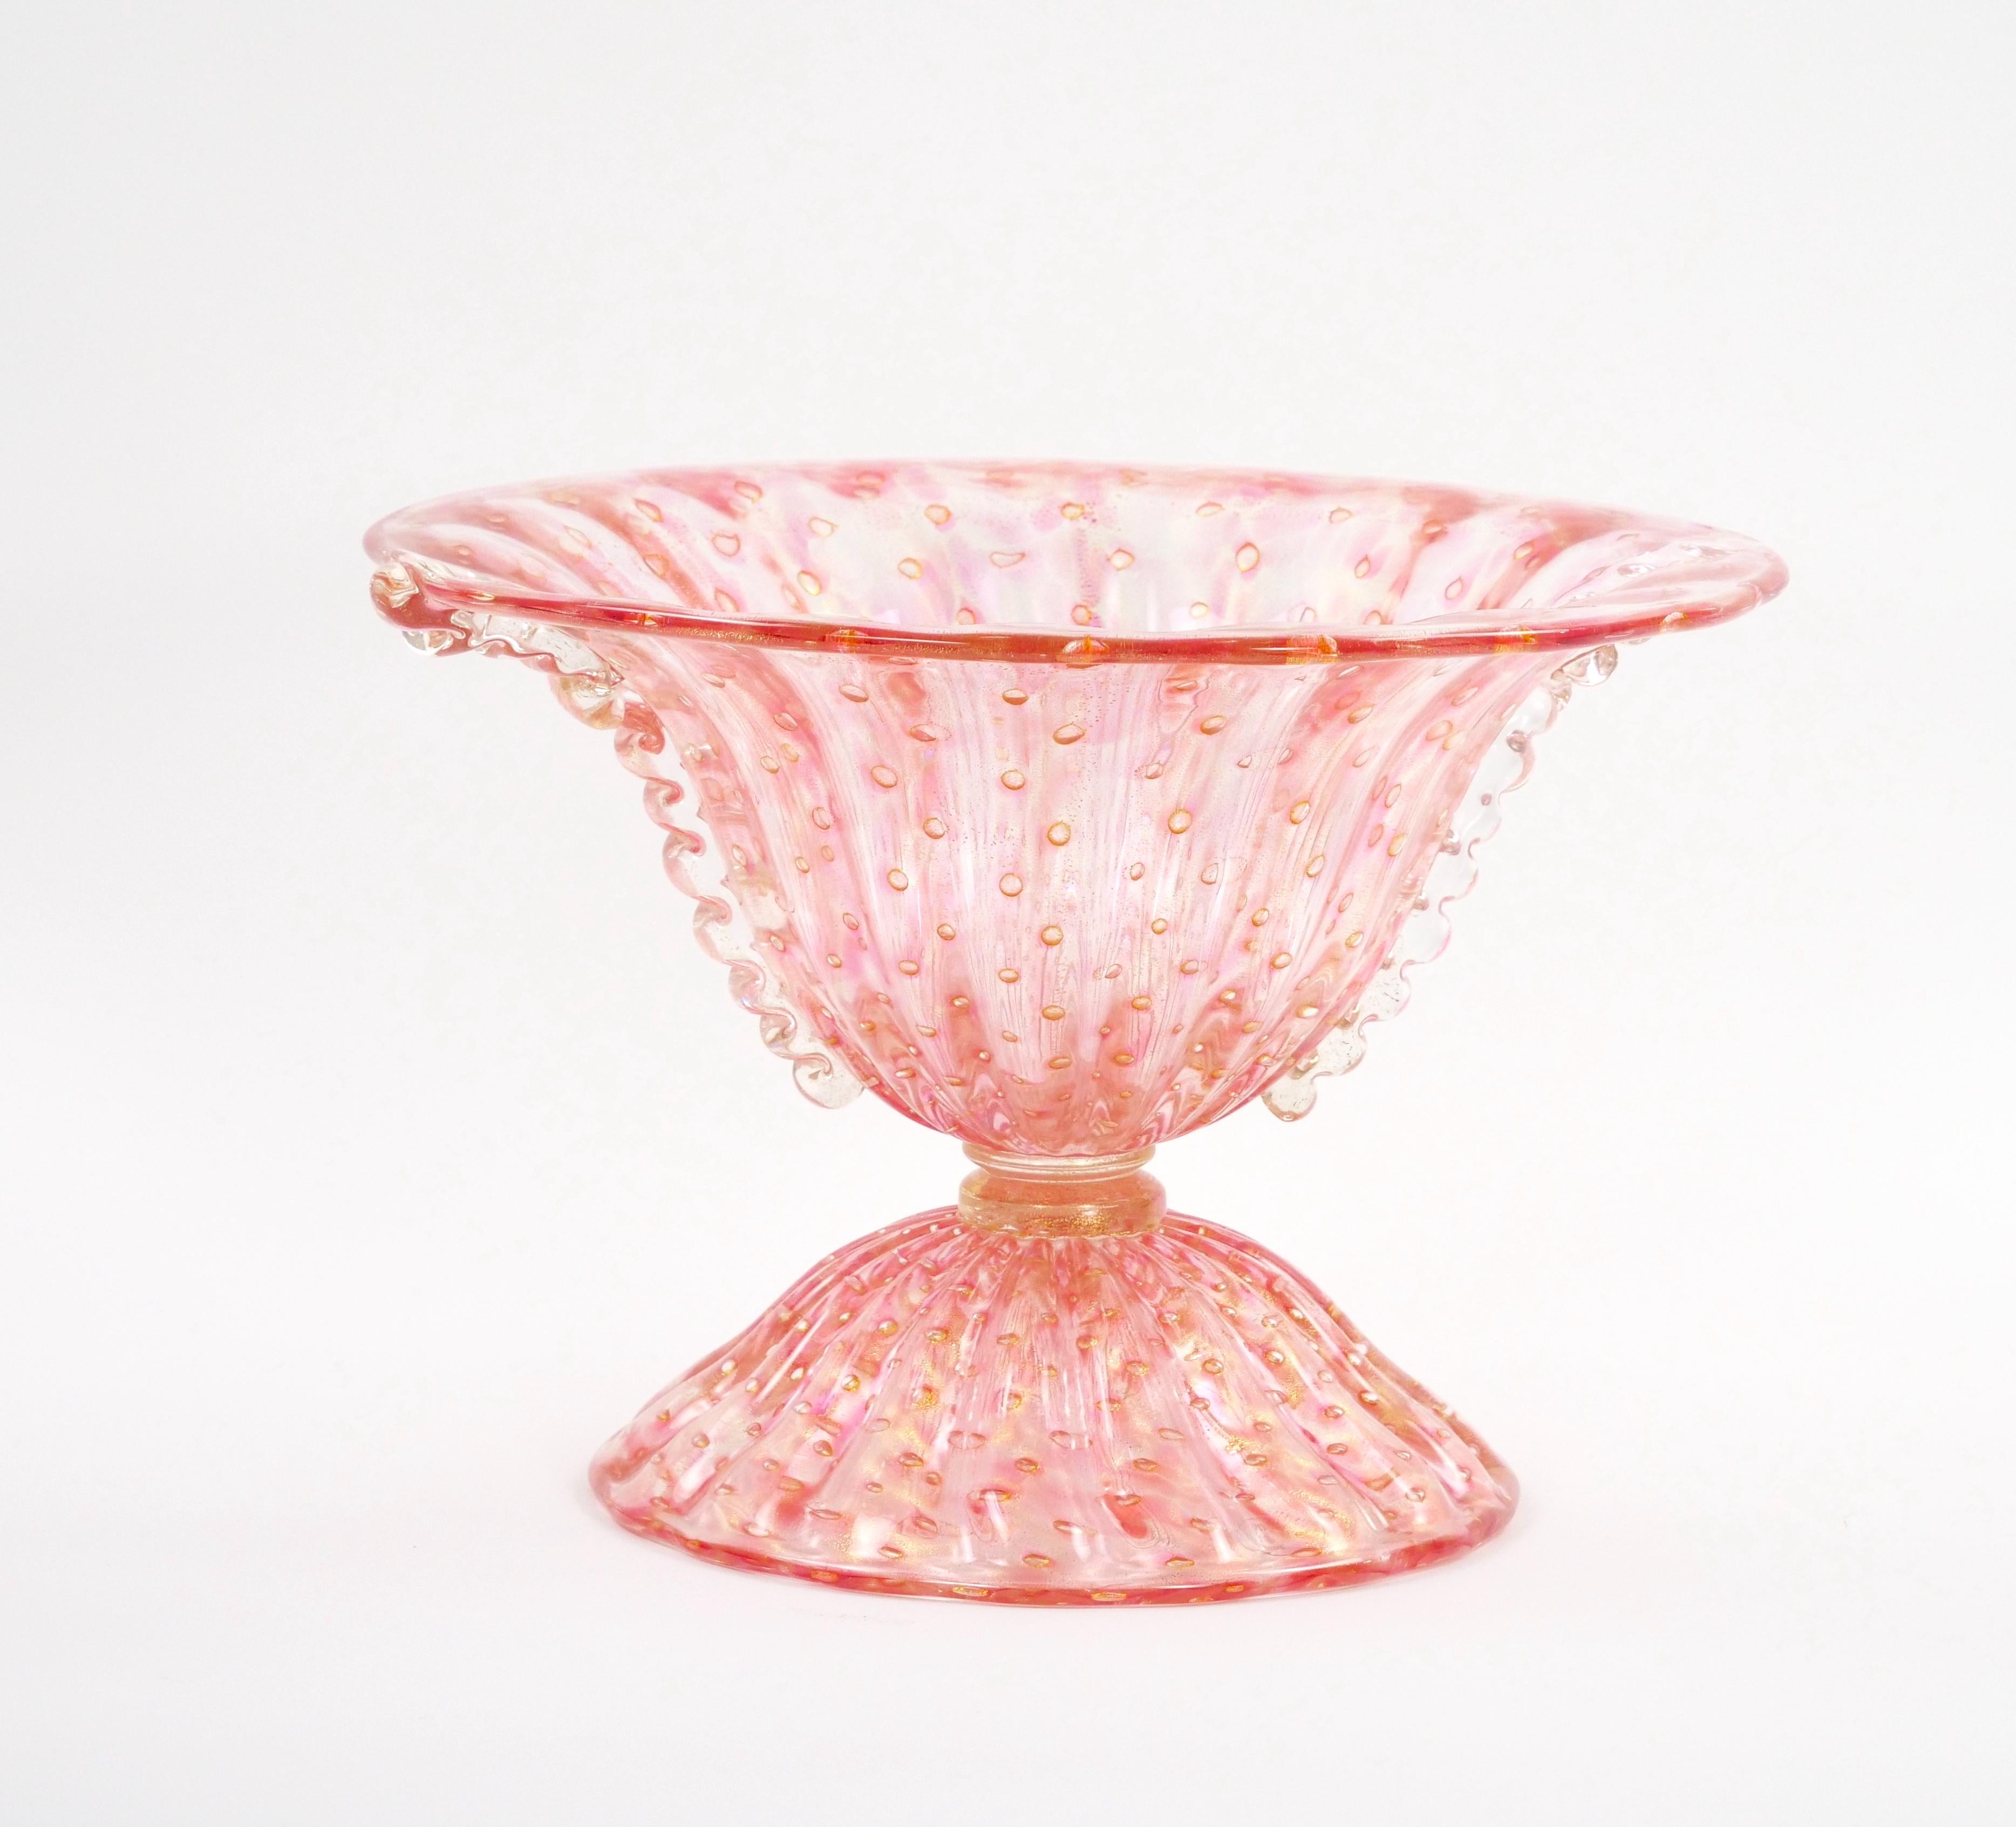 Murano Bullicante / Gold Infused Rose Colored Glass Tableware Centerpiece Bowl For Sale 6